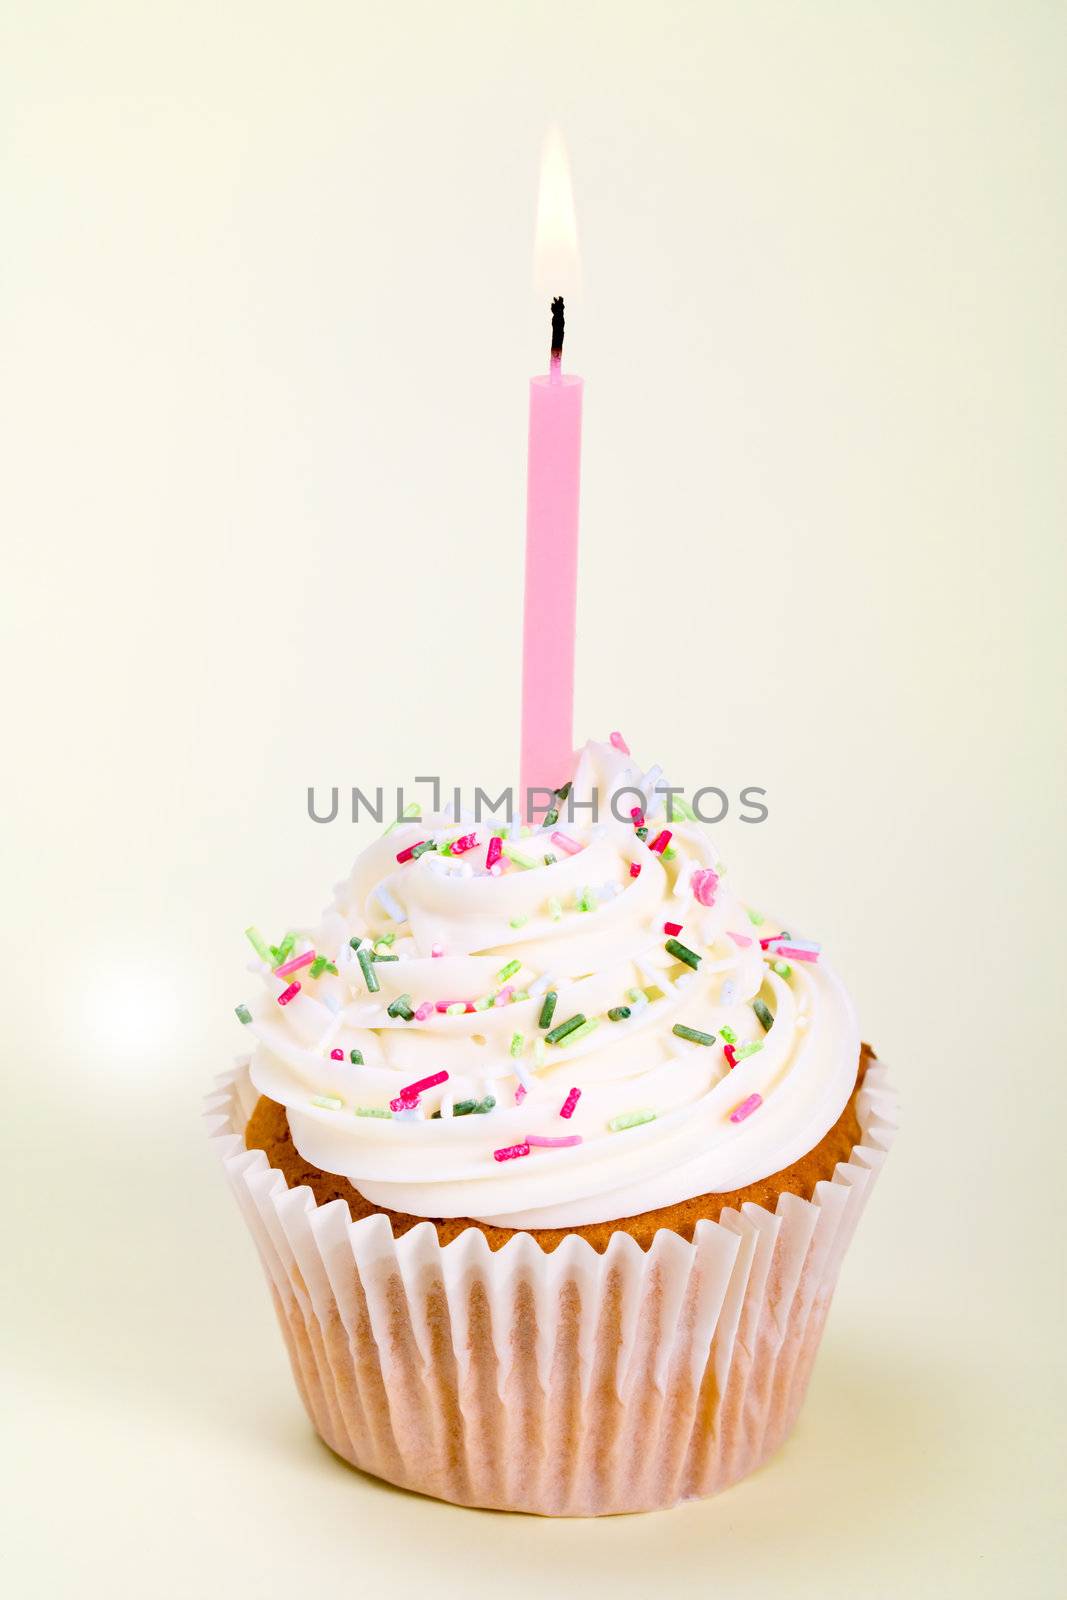 Cupcake decorated with sugar sprinkles and a single candle